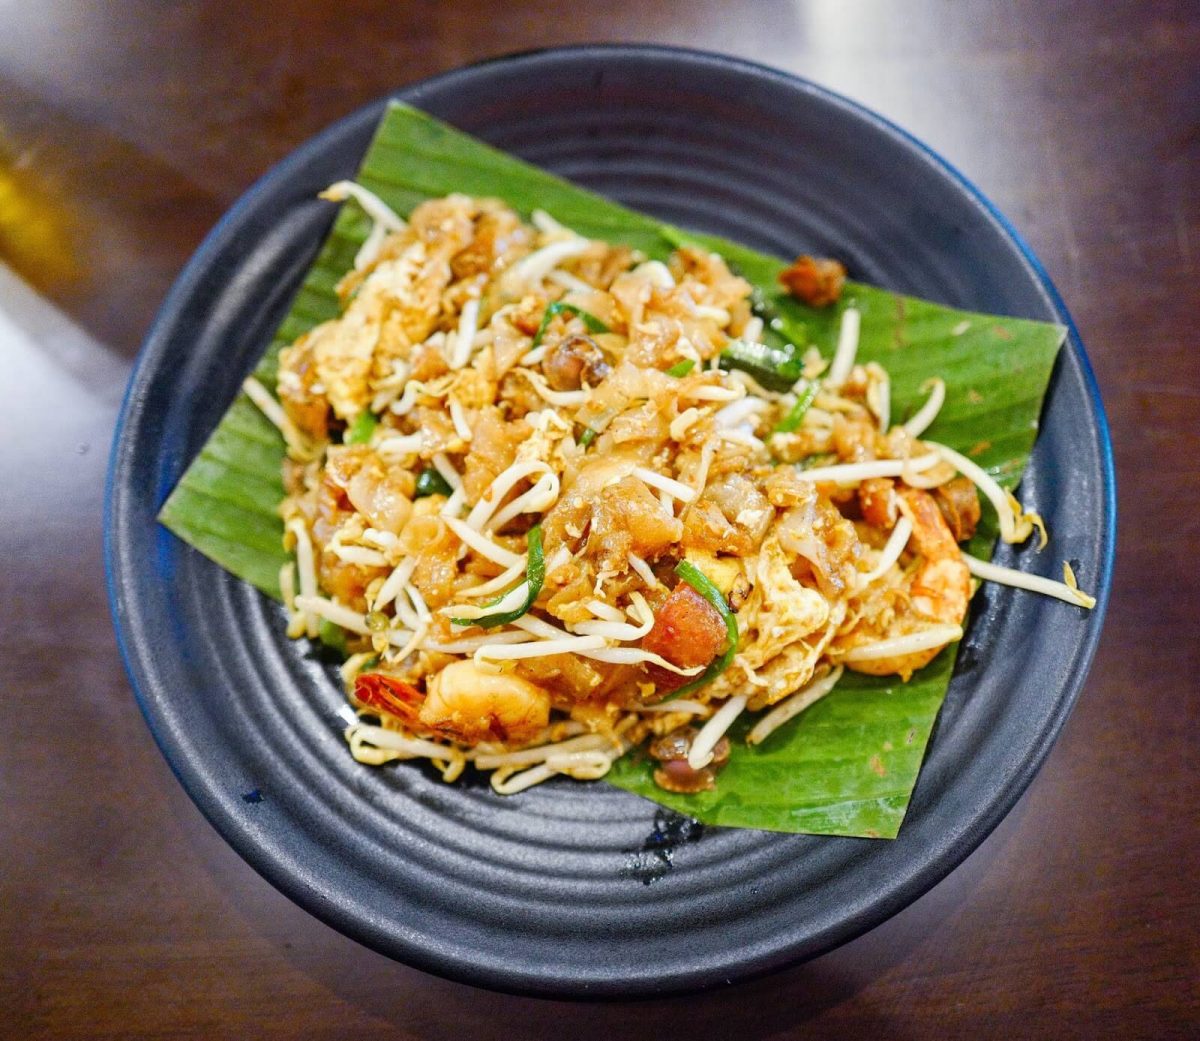 Malaysians’ favourite – Char Kuey Teow is available at He.Art Restaurant & Bar